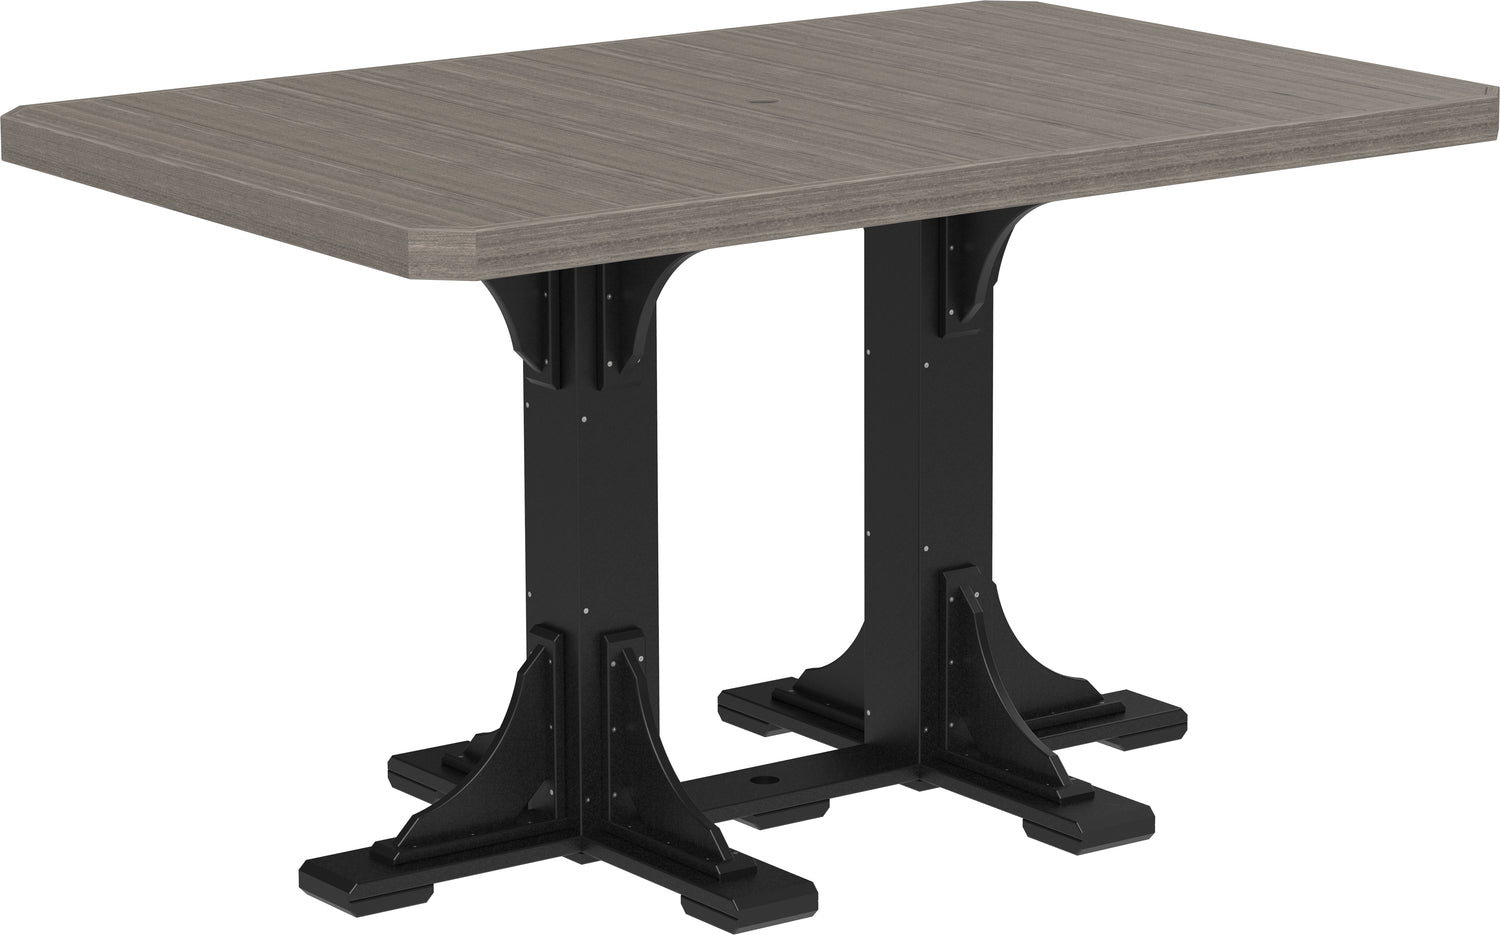 American Made Recycled Plastic Outdoor Bar height Table Collection